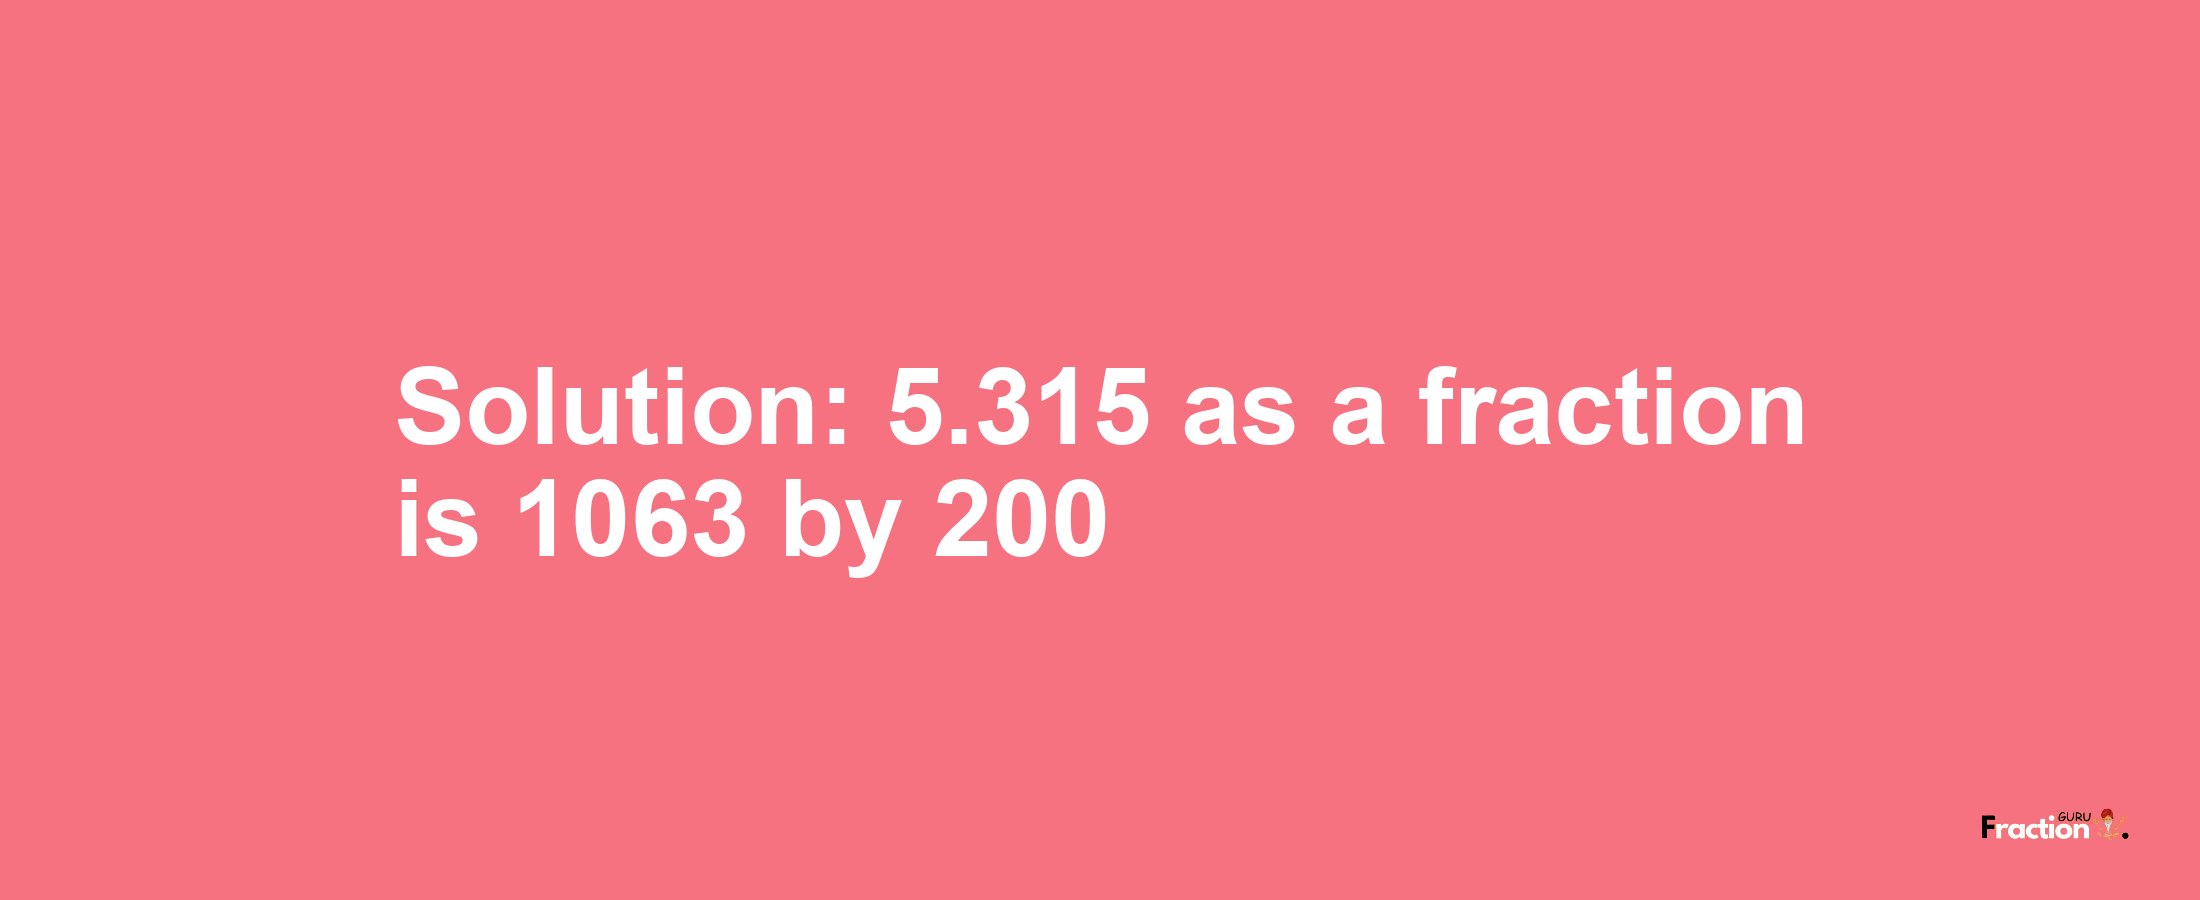 Solution:5.315 as a fraction is 1063/200